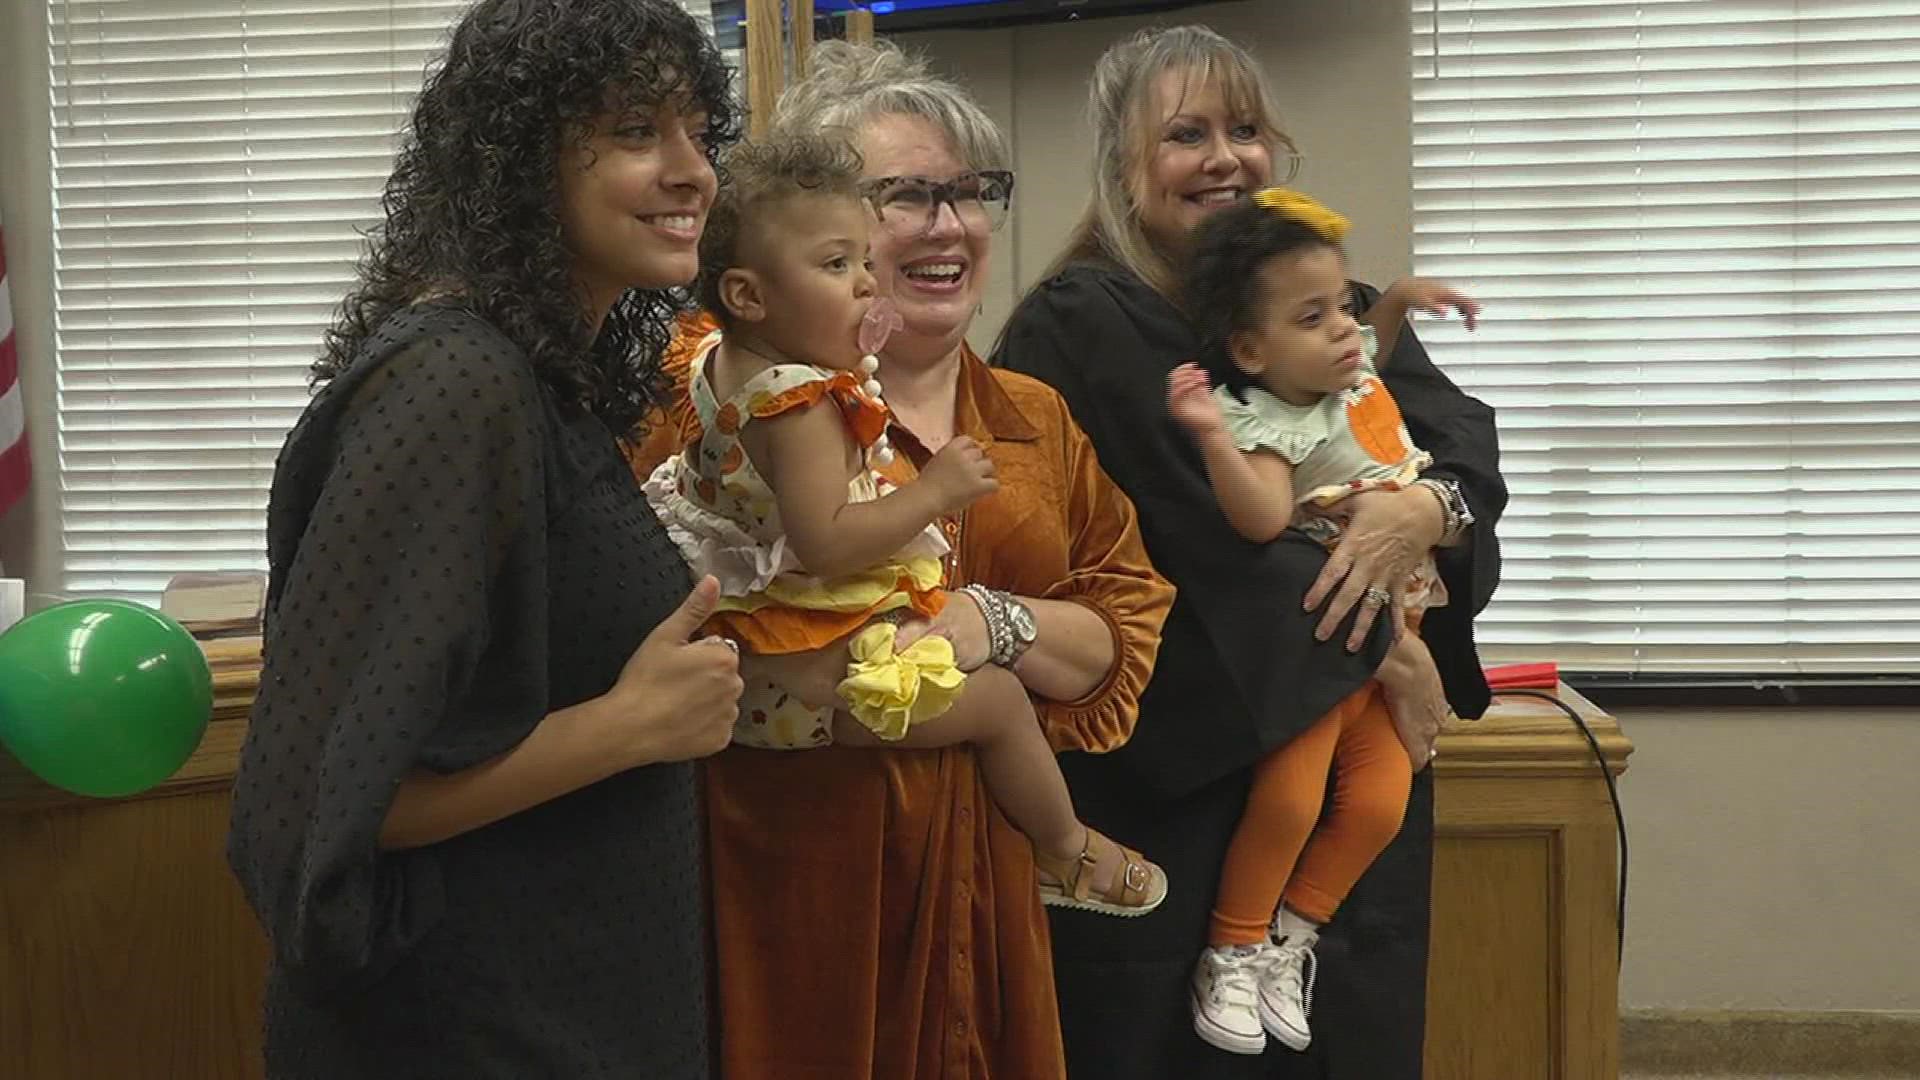 November is National Adoption Month. The courtroom of Judge Mandy Rodgers was packed with people waiting to complete their families.